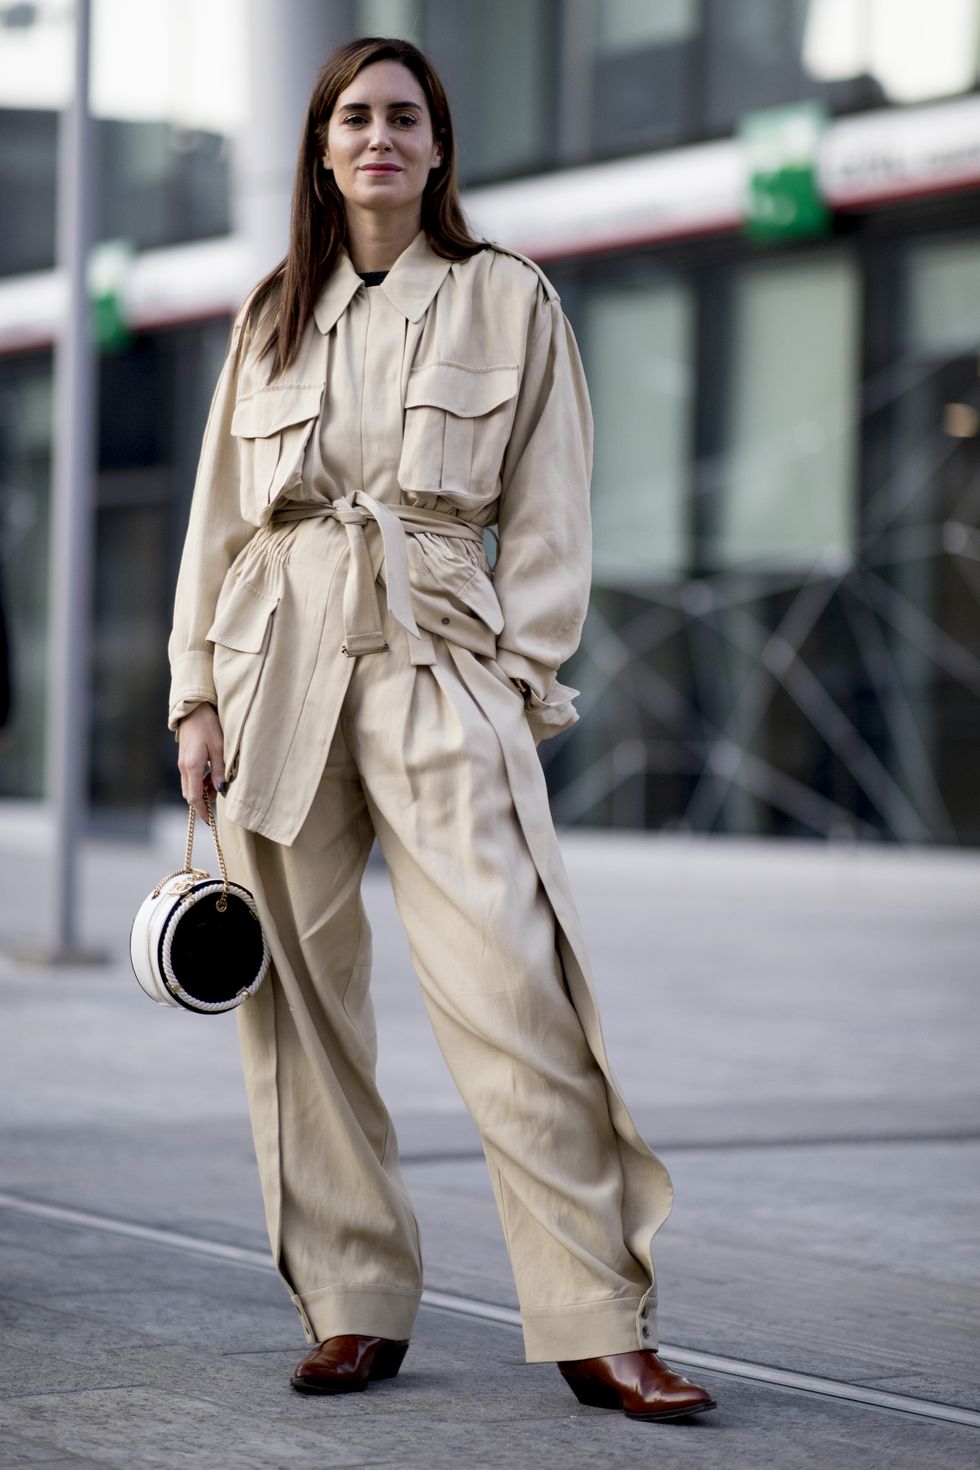 Street fashion, Photograph, Clothing, Fashion, Snapshot, Outerwear, Trench coat, Beige, Shoulder, Human, 